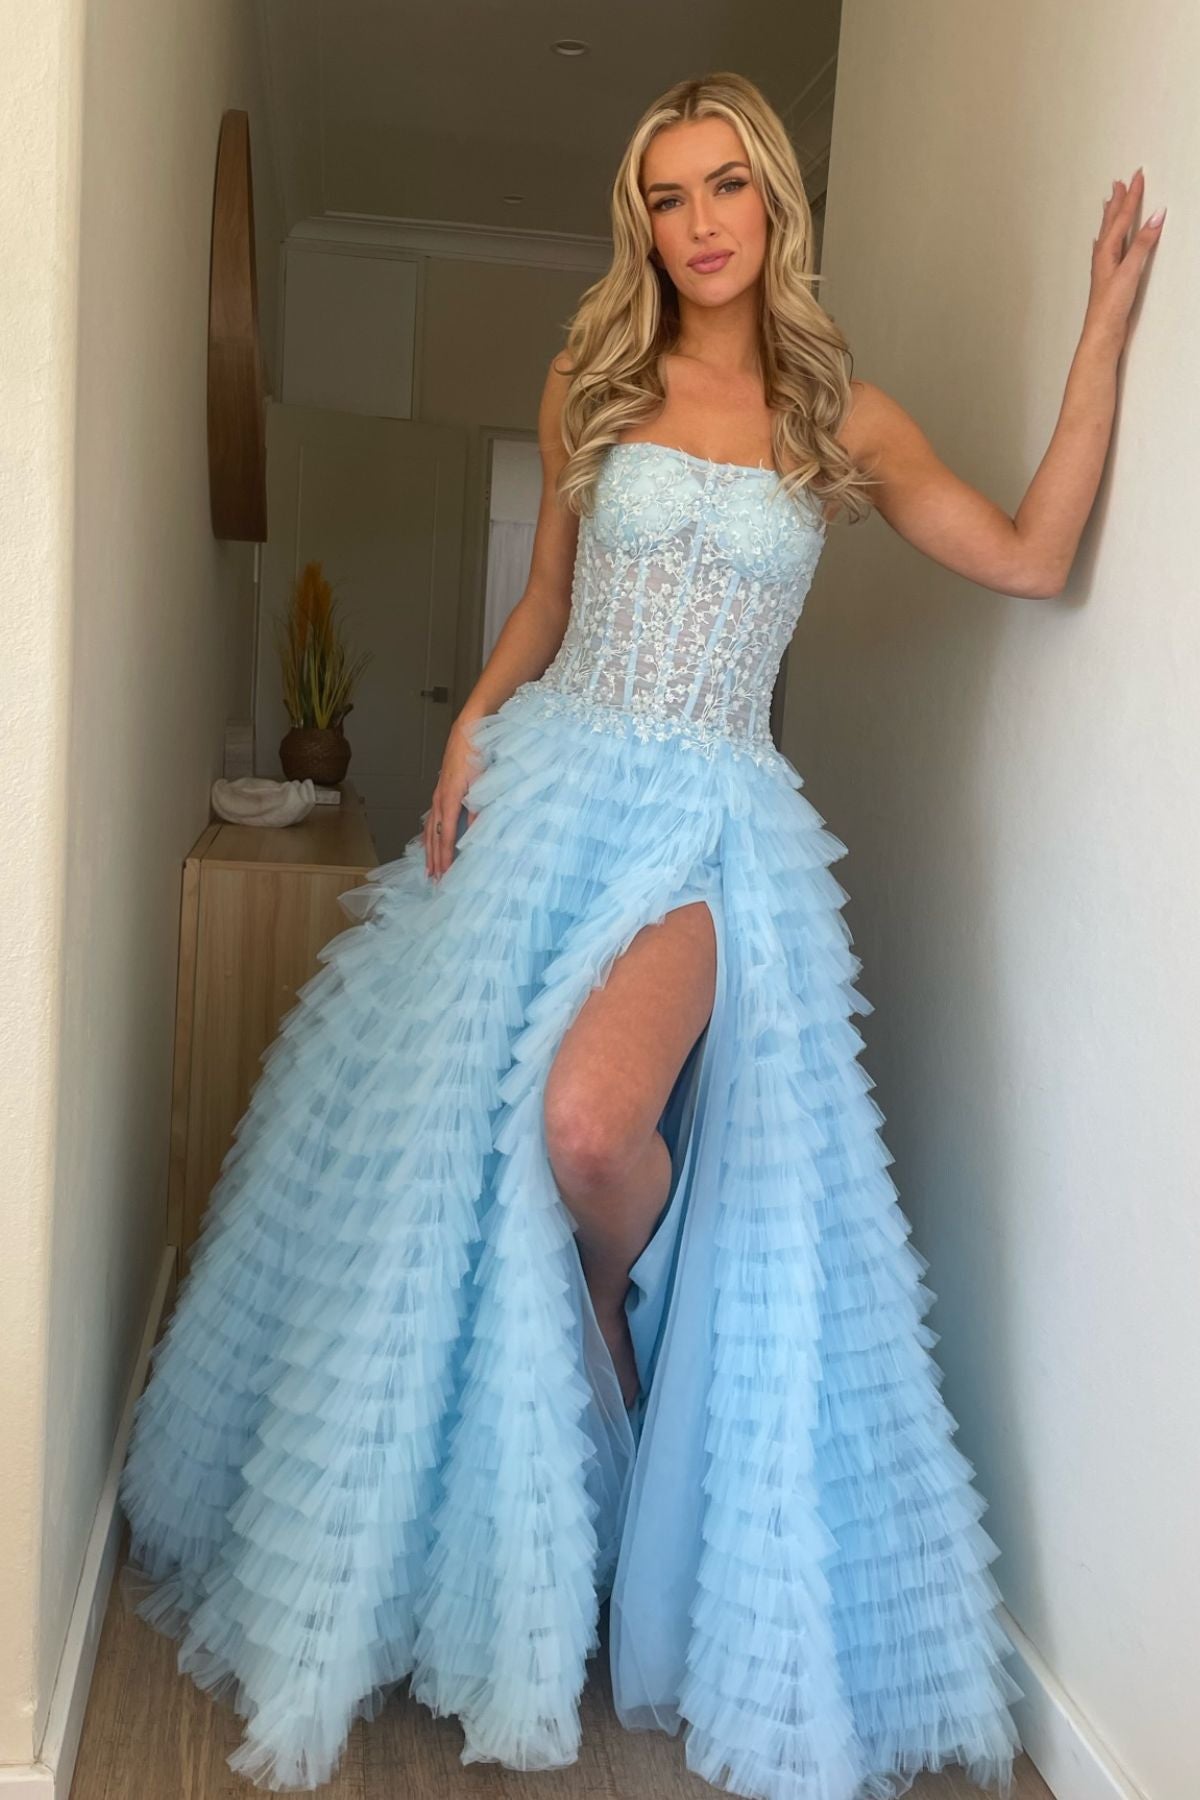 Rent SHERI HILL Magnolia Gown 54189 (Blue) - Rent this dress!